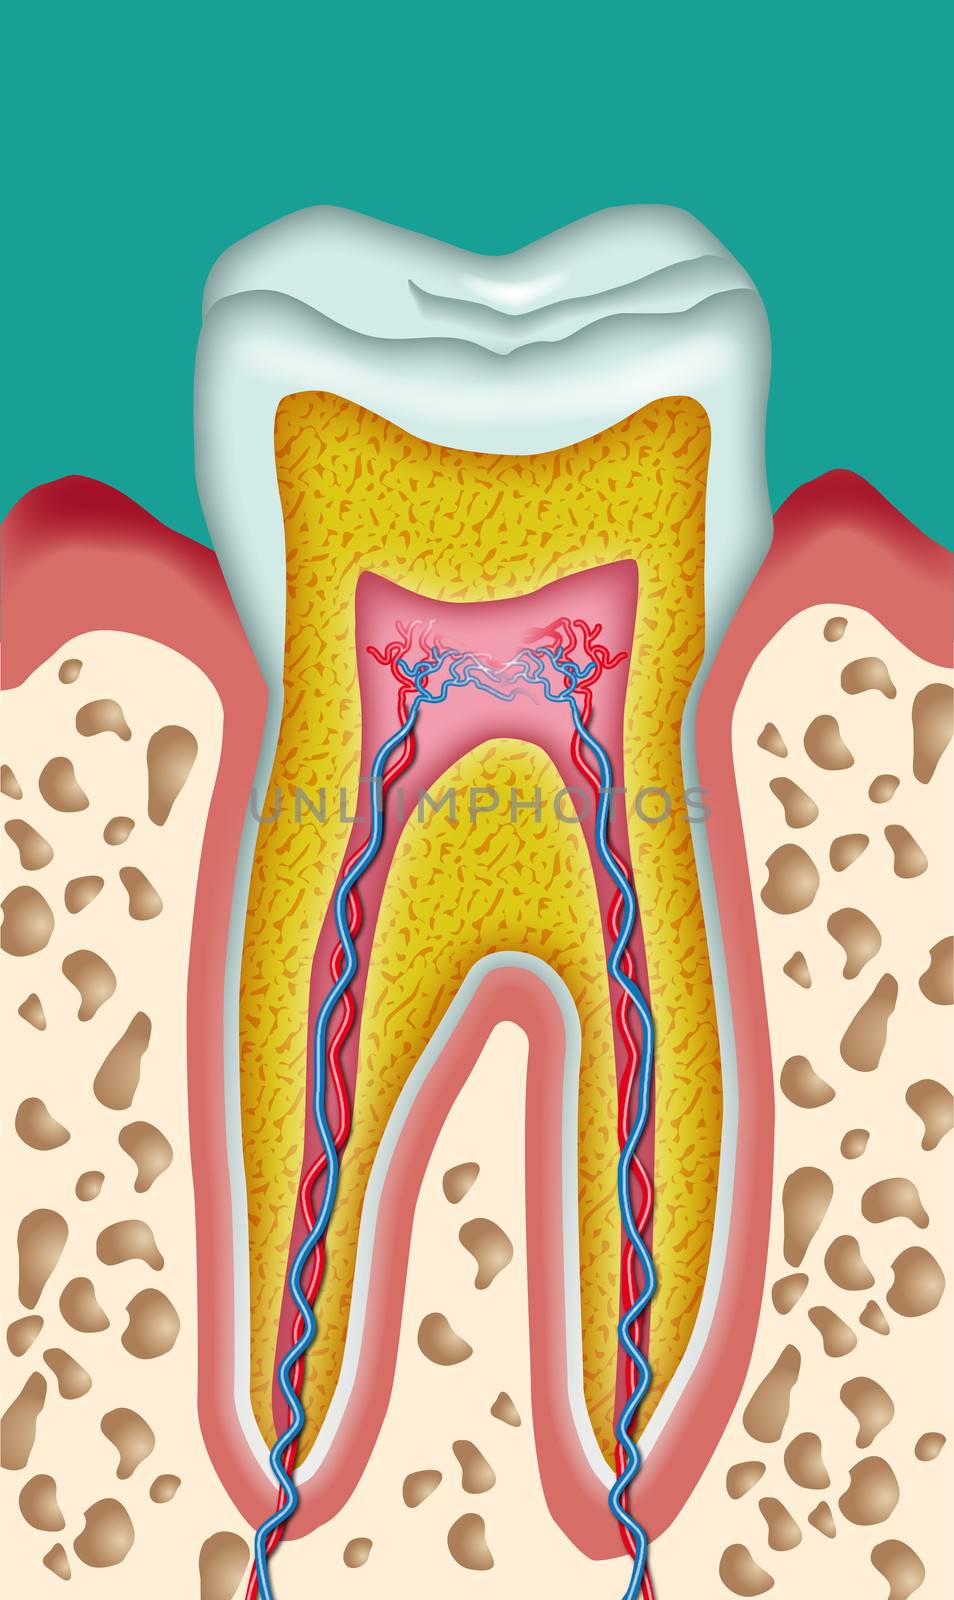 Section of a tooth schematic drawing cutout